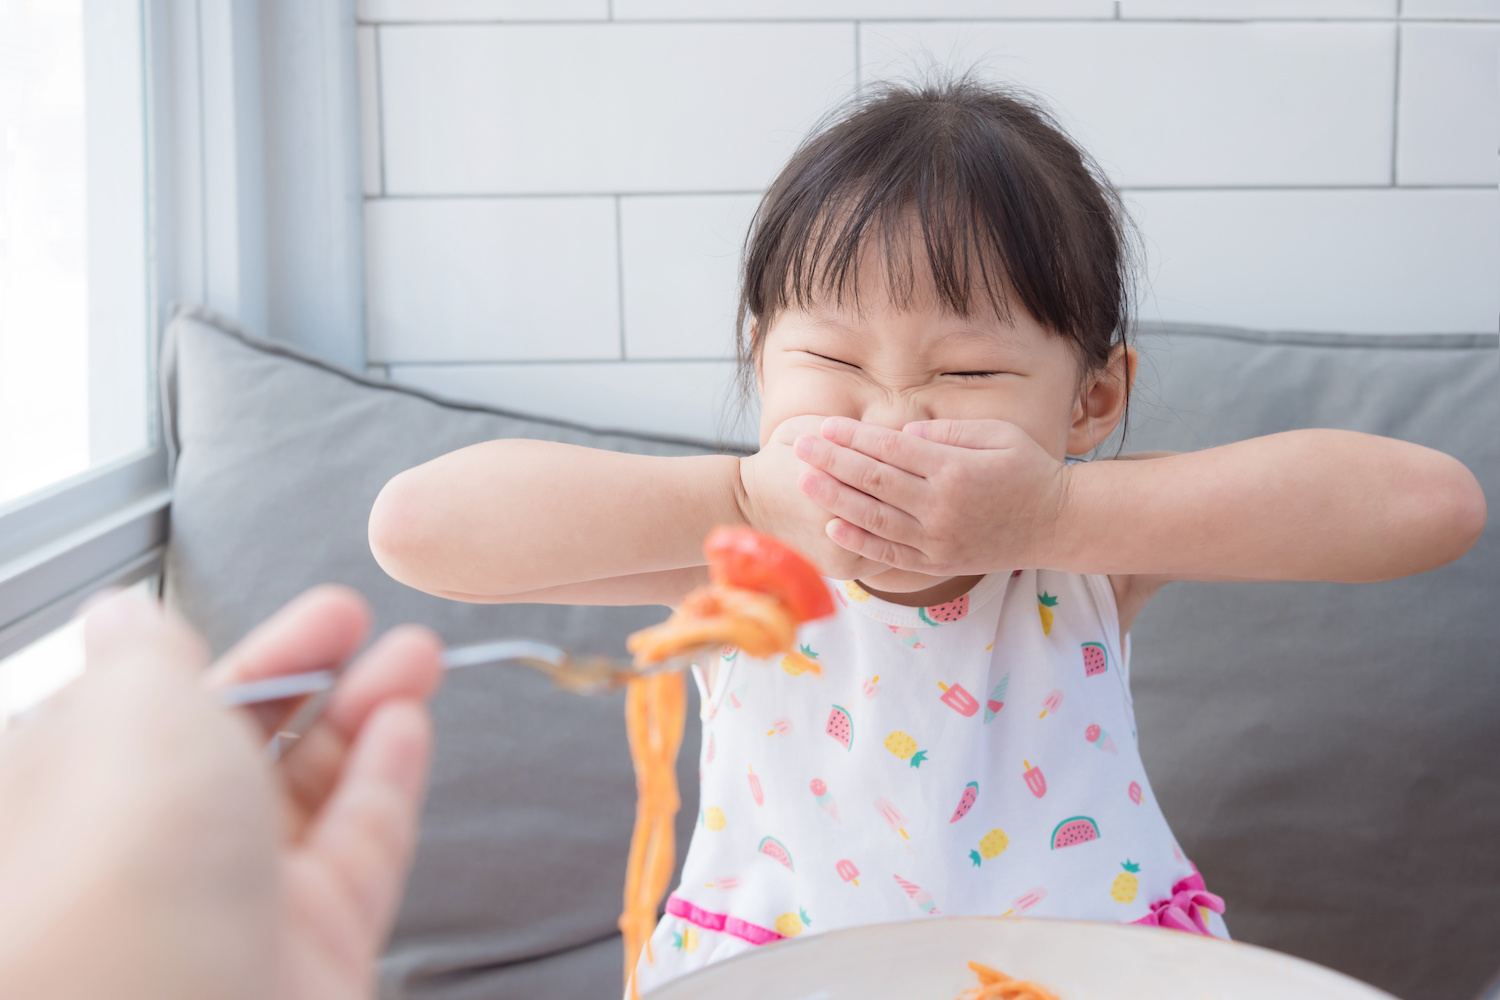 Helping Your Picky Eater